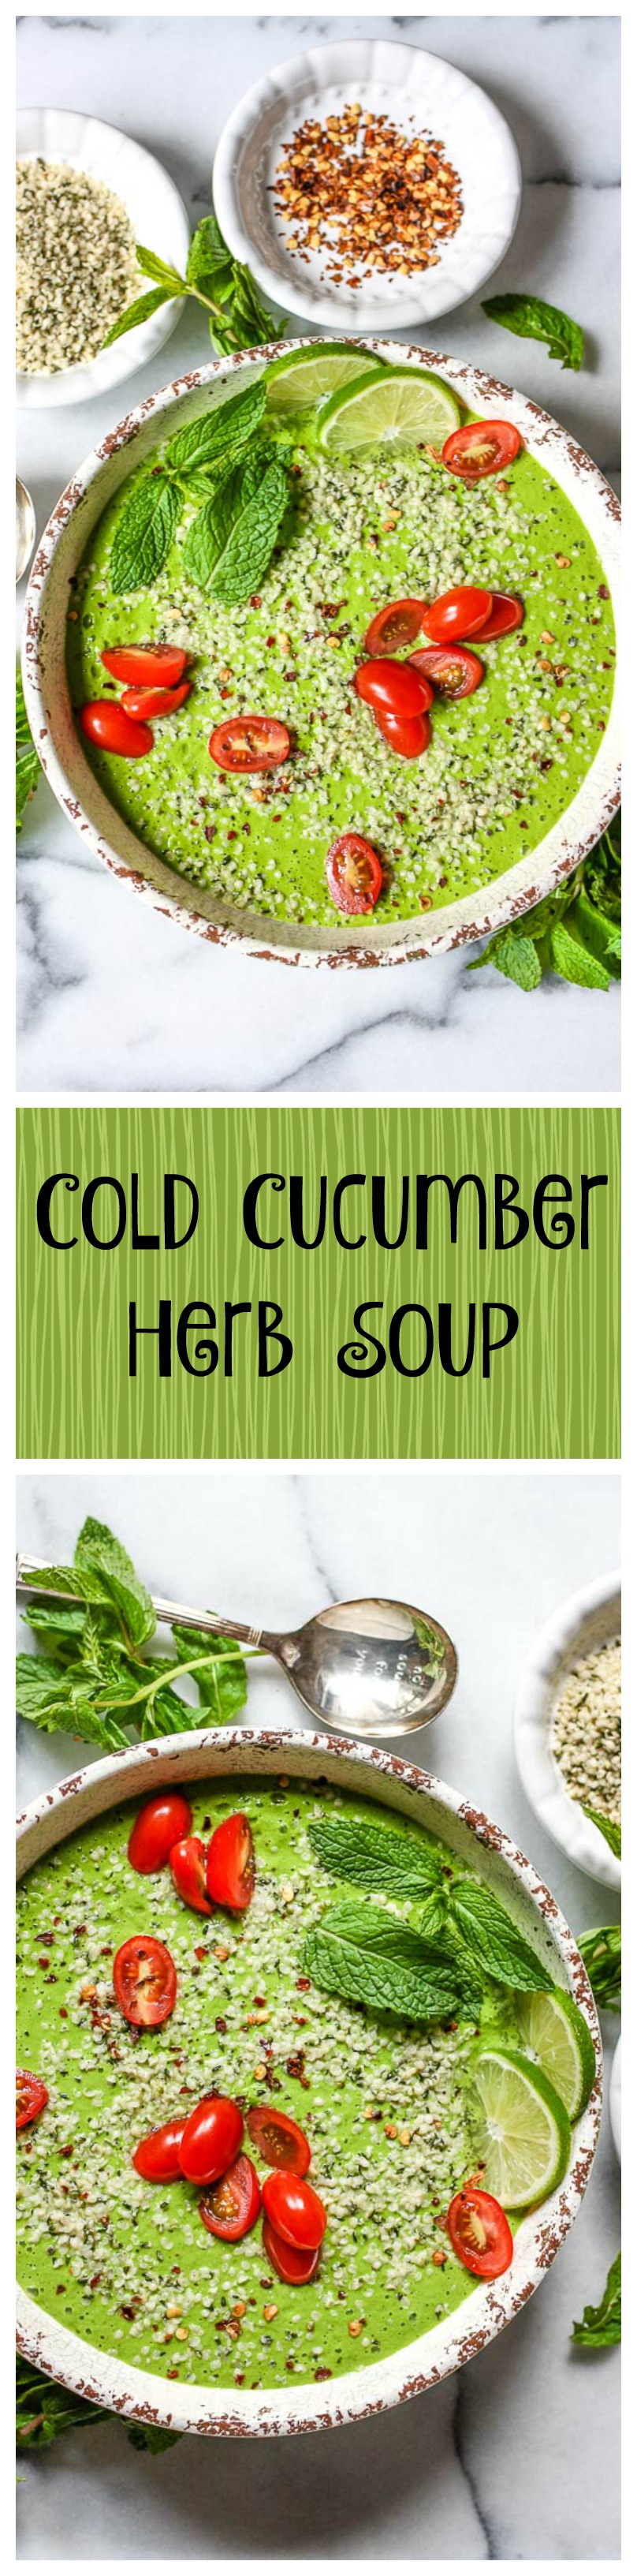 cold cucumber herb soup